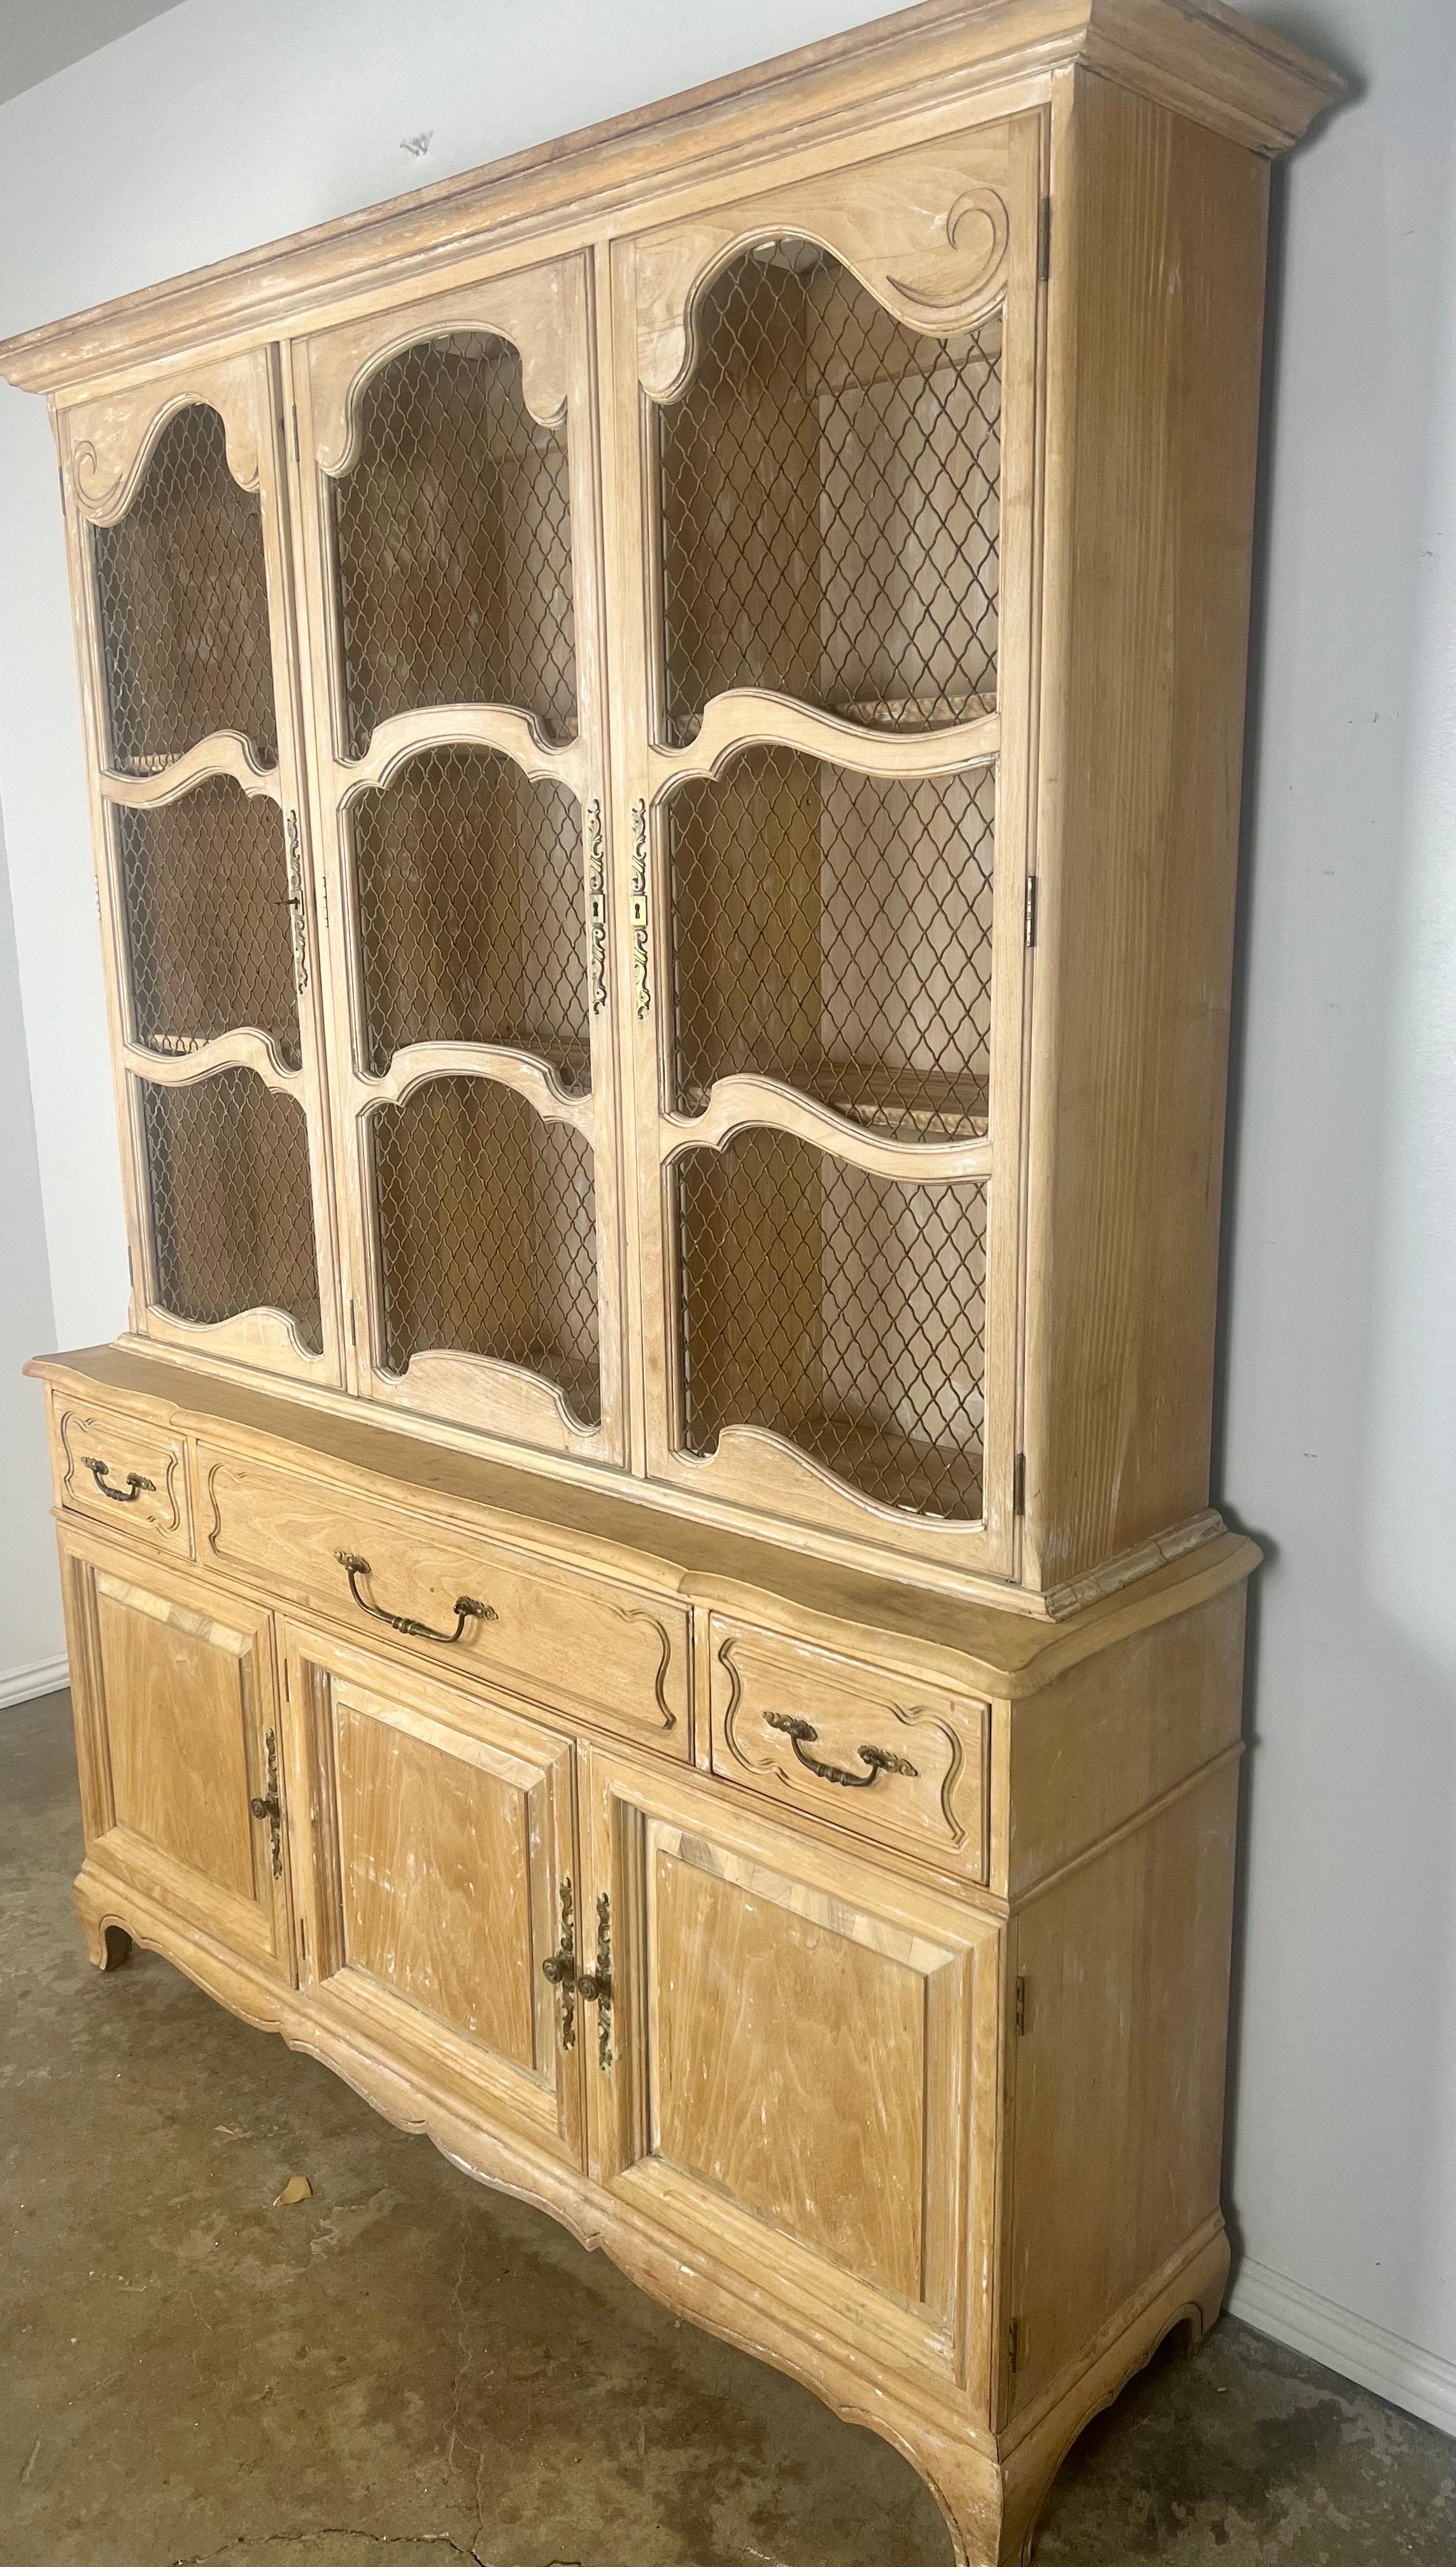 19th century French Louis XV style cabinet with ample storage.  The cabinet has a beautiful weathered finish. Original brass hardware and metal grates inside the doors.